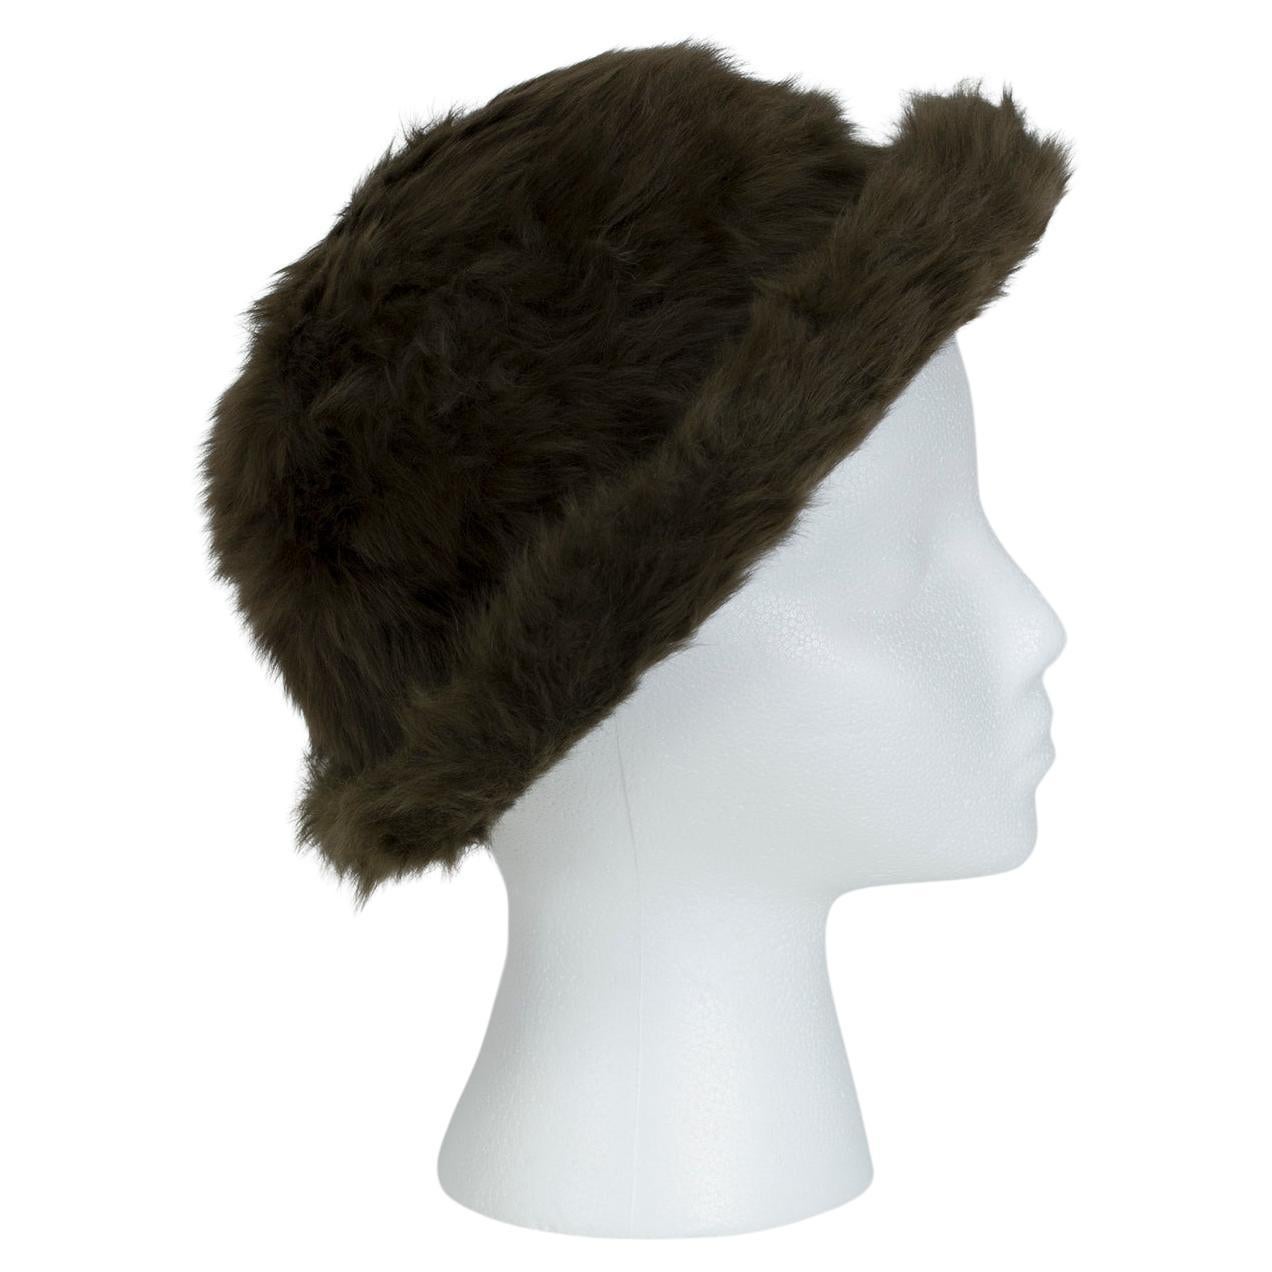 James Galanos Brown Toscana Shearling Fur Bowler Hat - S, 1980s For Sale